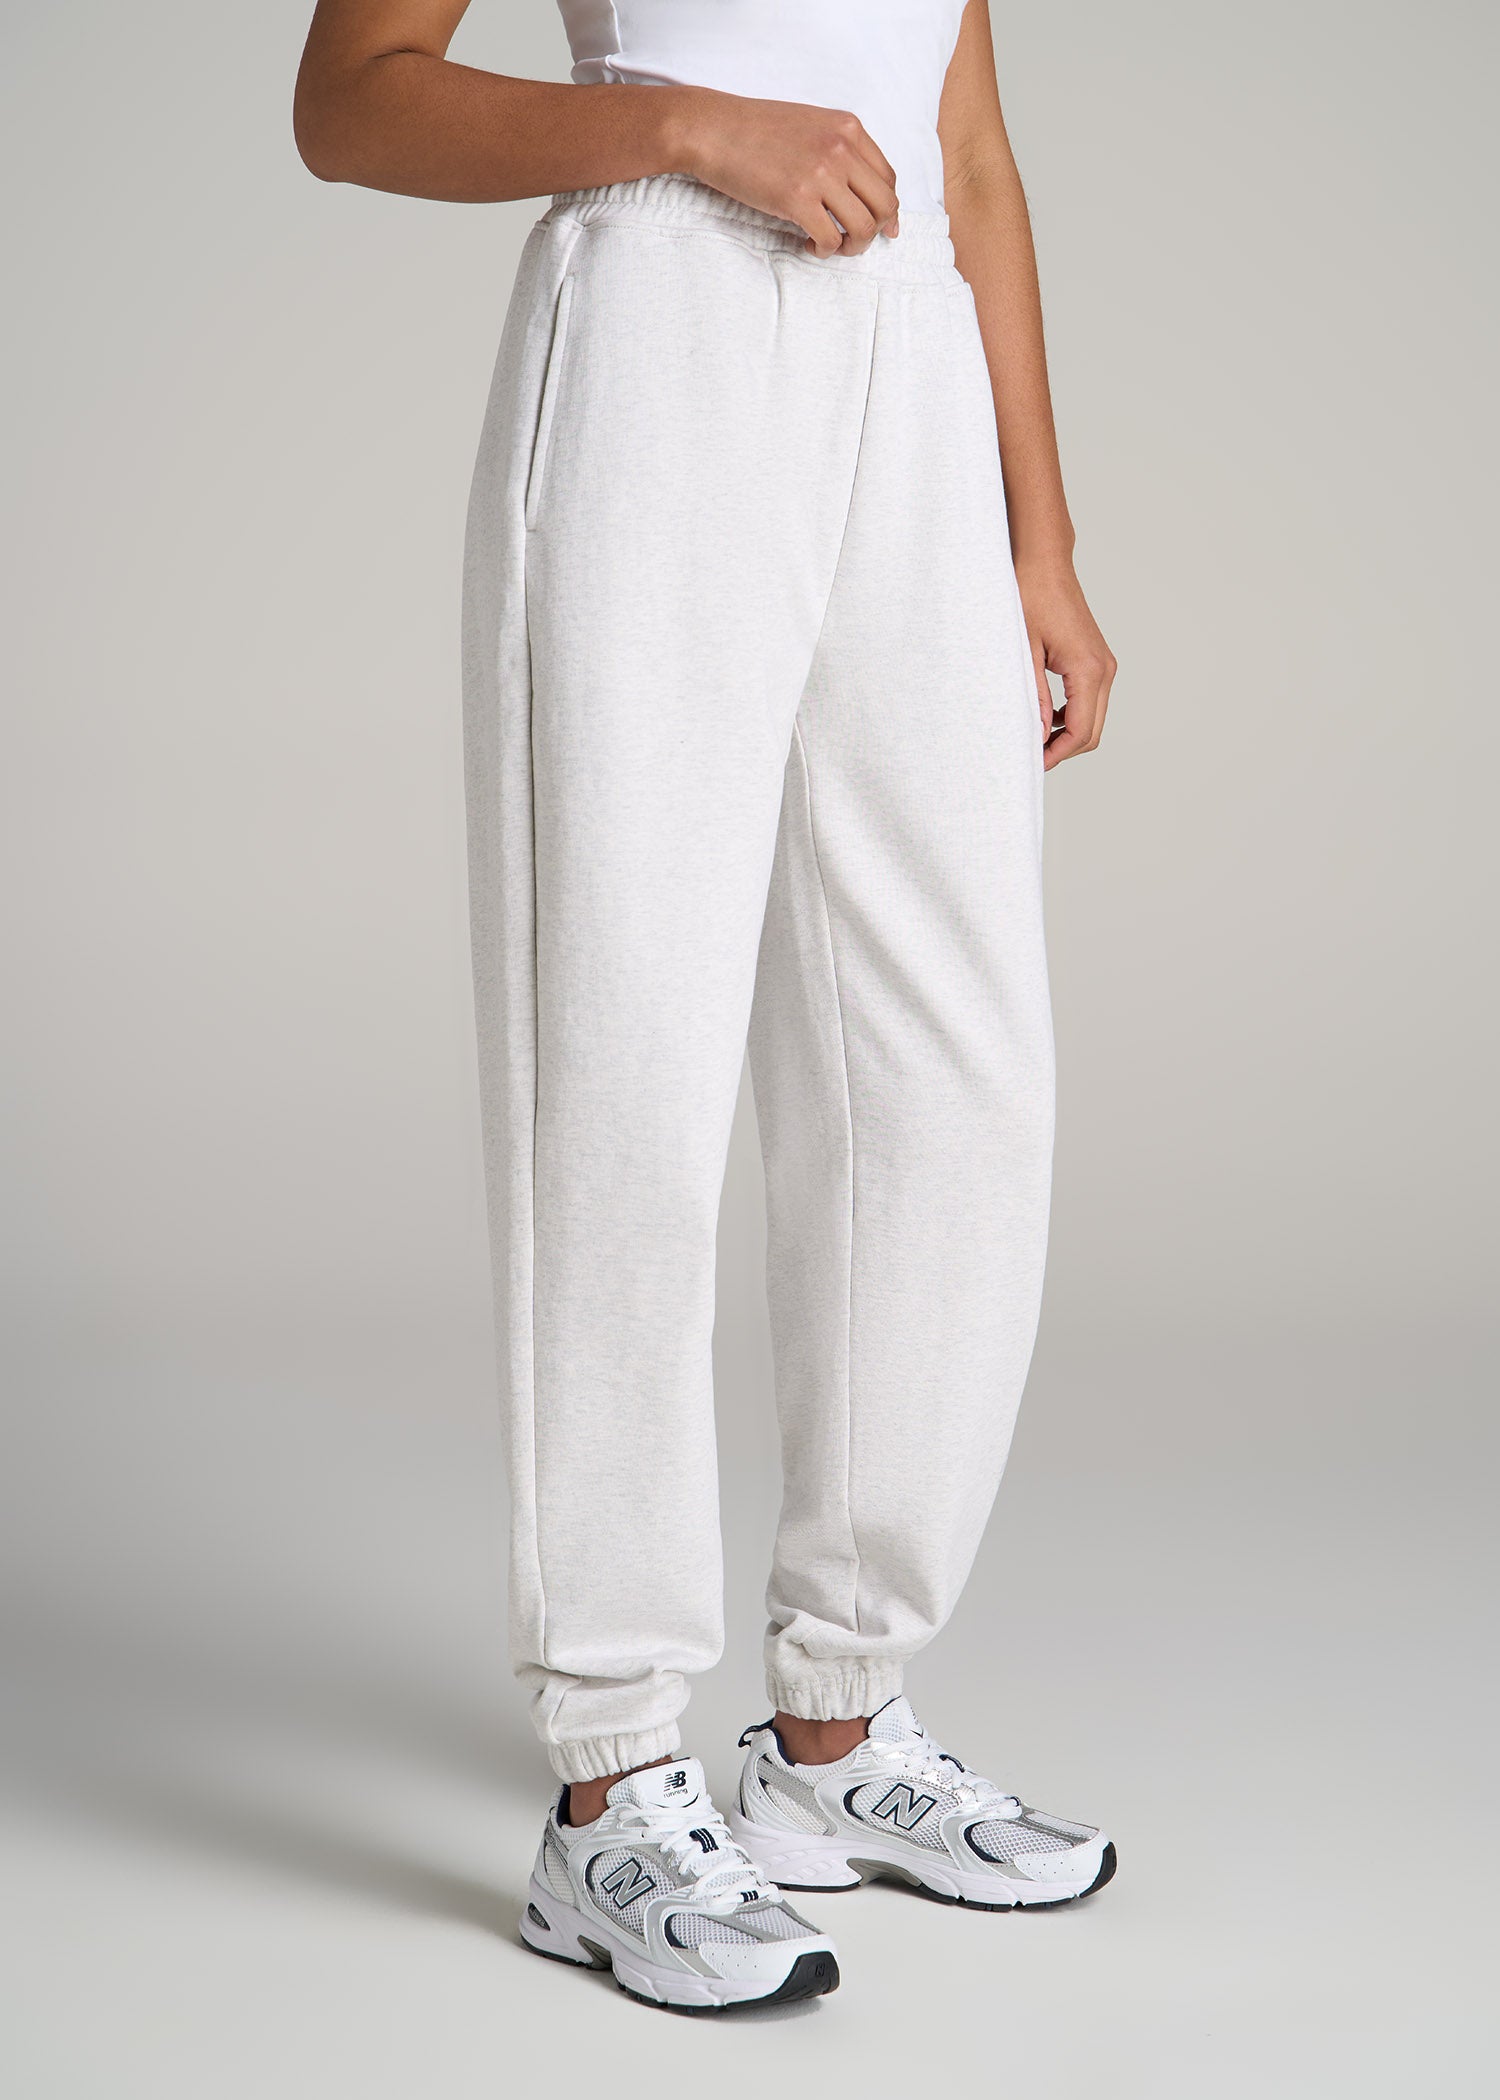 TENTREE FRENCH TERRY WIDELEG SWEATPANTS - CLEARANCE